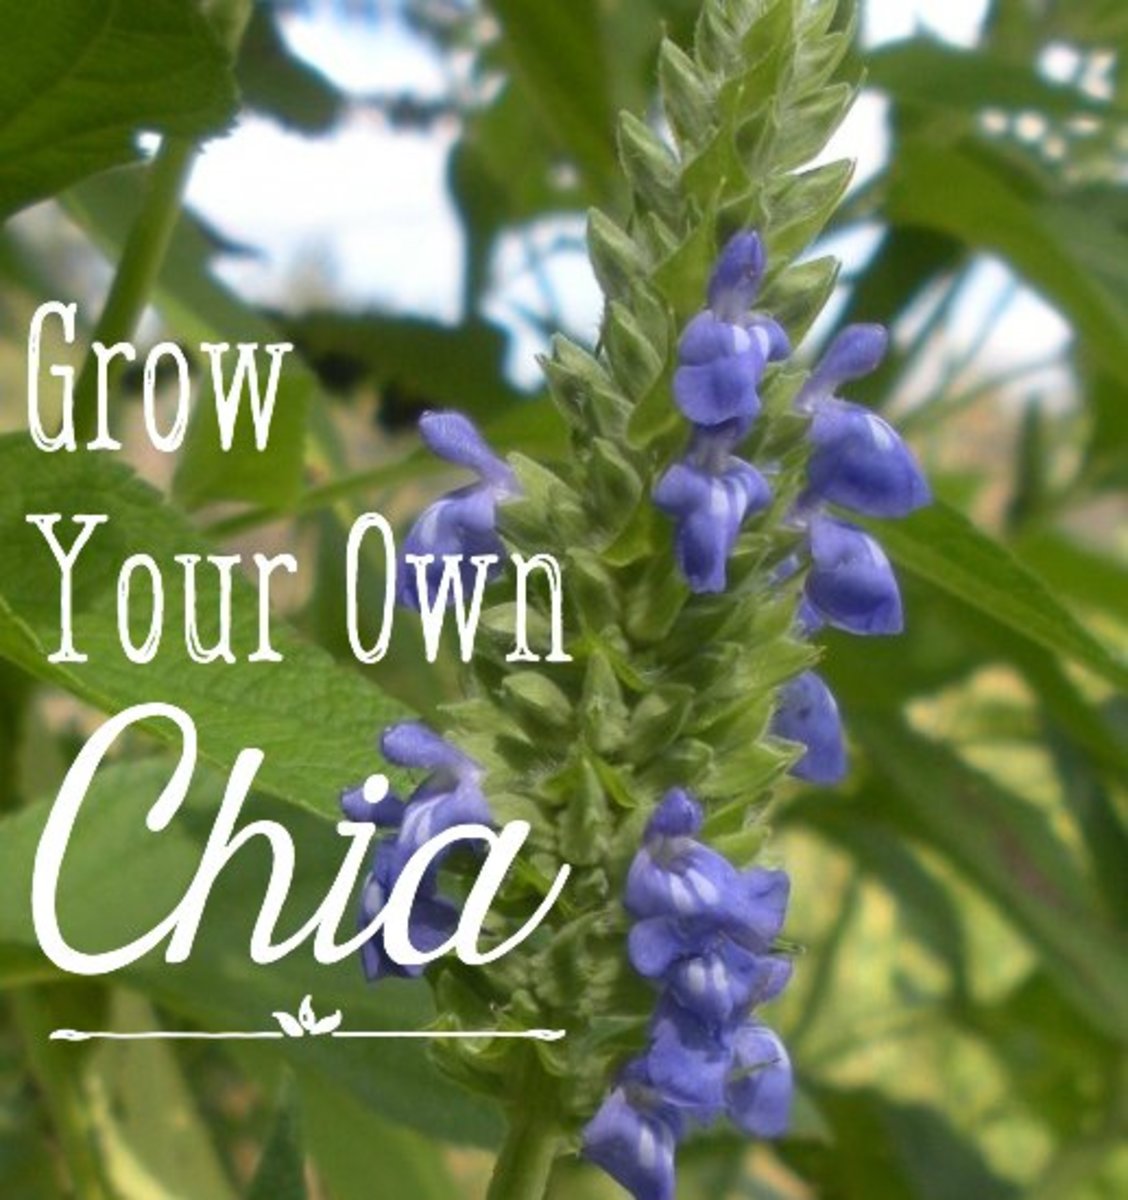 You can grow these nutritious seeds at home. It's easy!